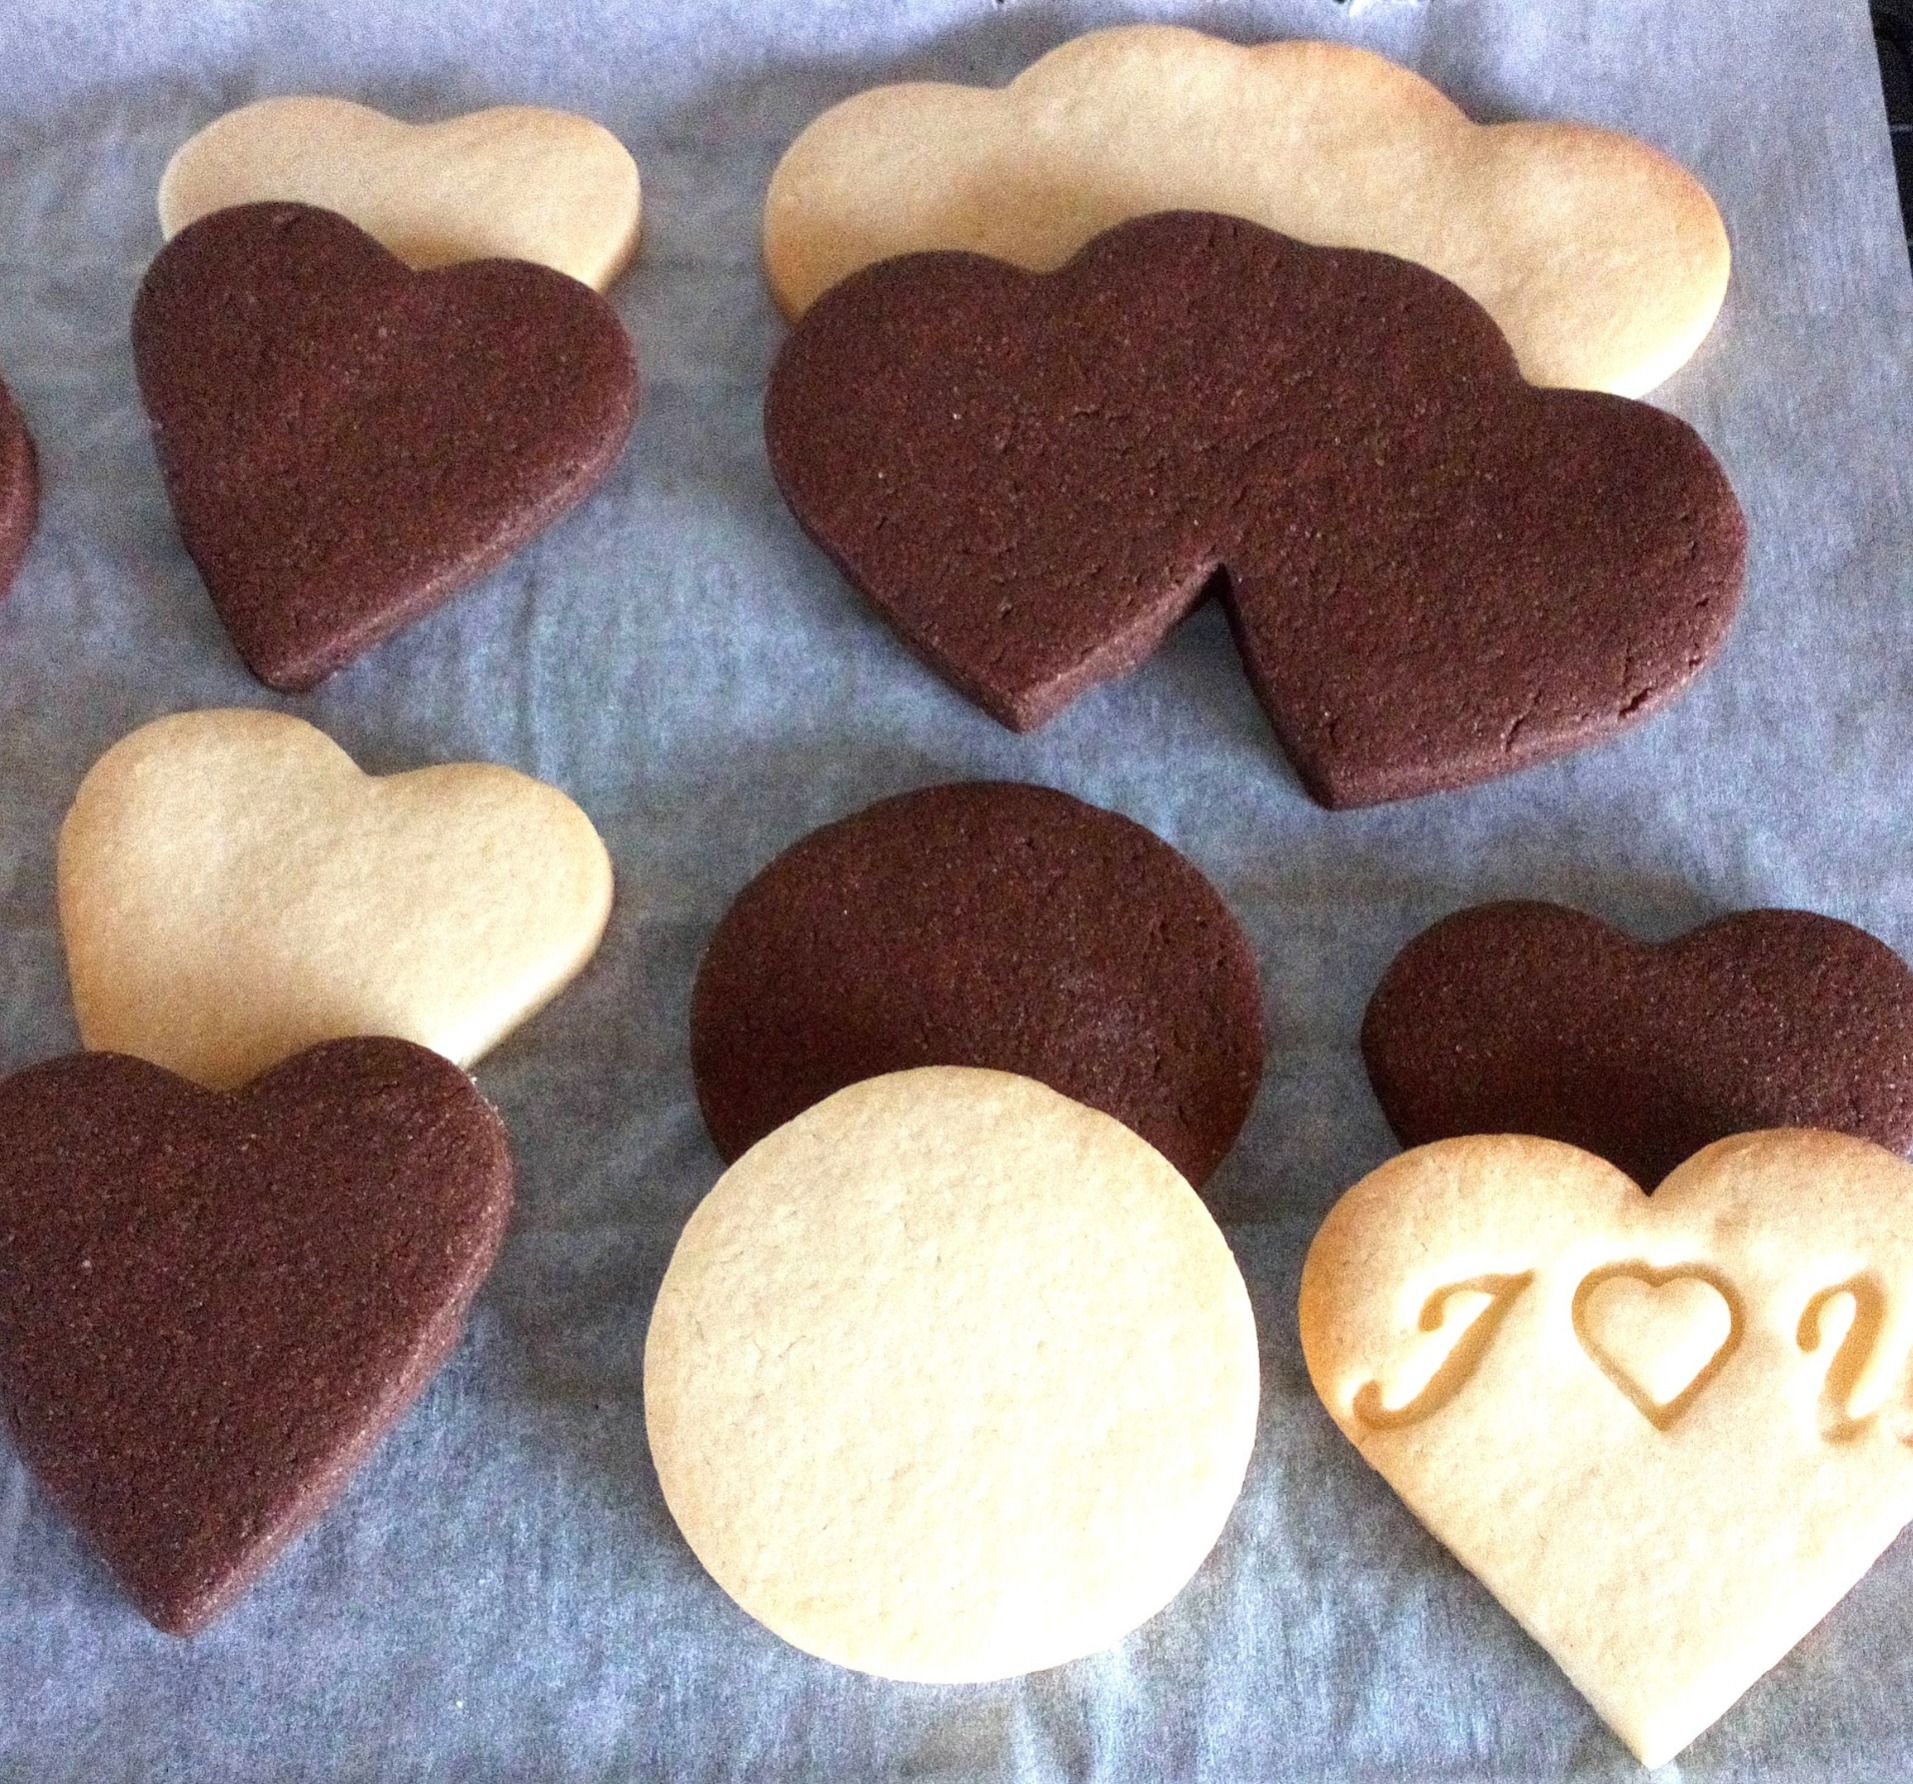 Plain and chocolate shortbread biscuits